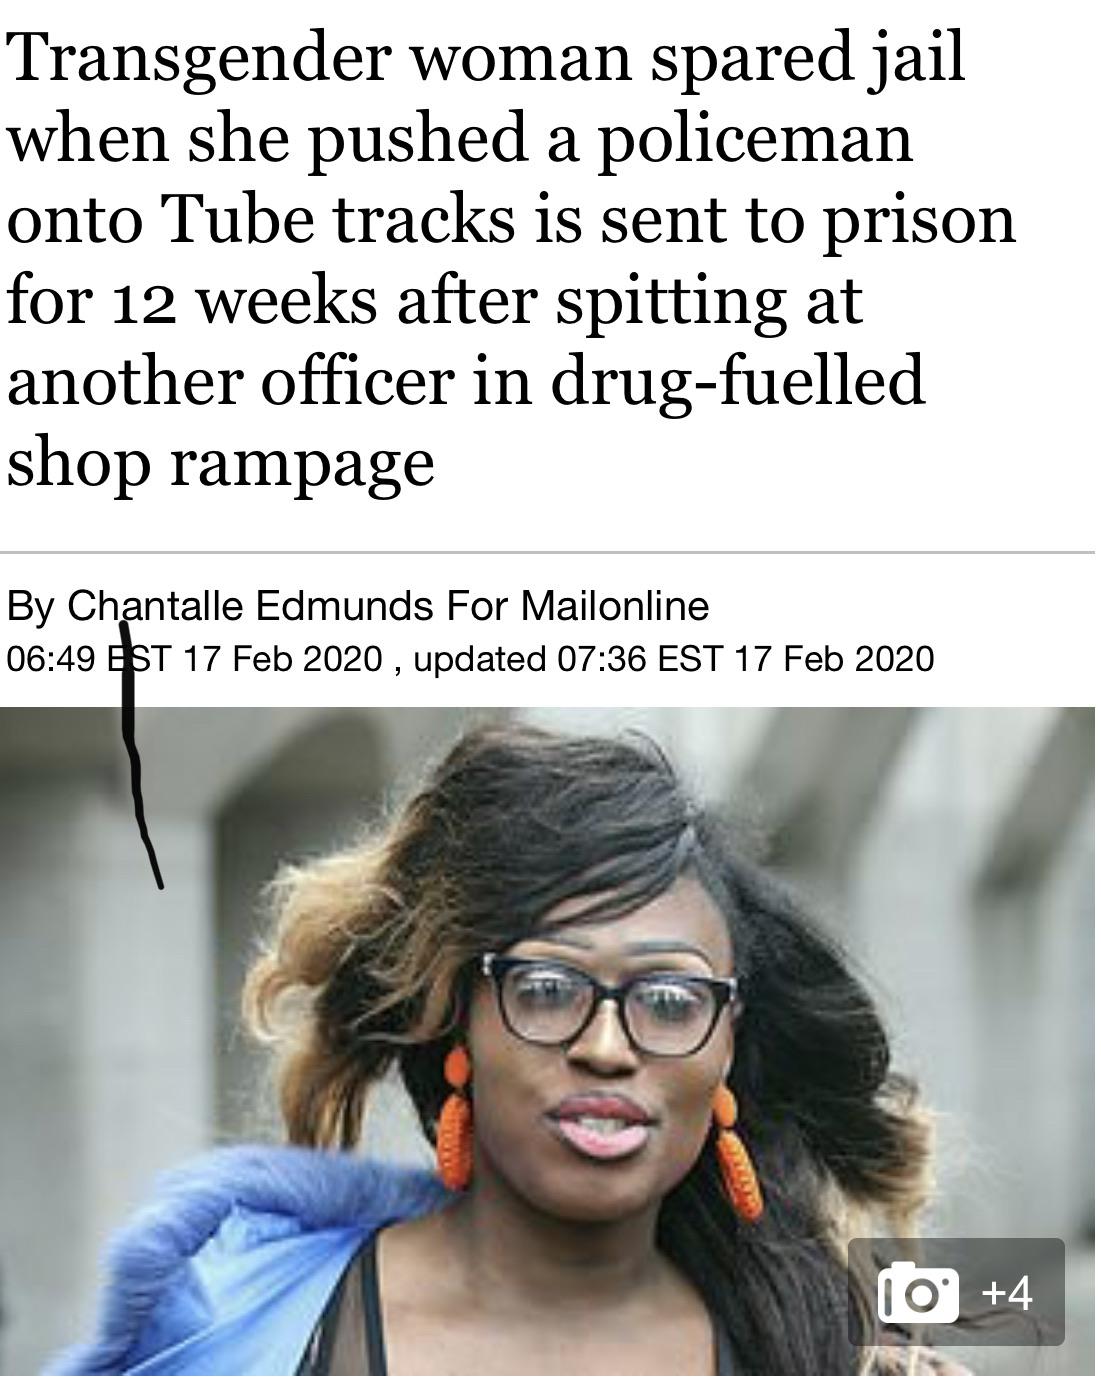 glasses - Transgender woman spared jail when she pushed a policeman onto Tube tracks is sent to prison for 12 weeks after spitting at another officer in drugfuelled shop rampage By Chantalle Edmunds For Mailonline Bst , updated Est 10 4